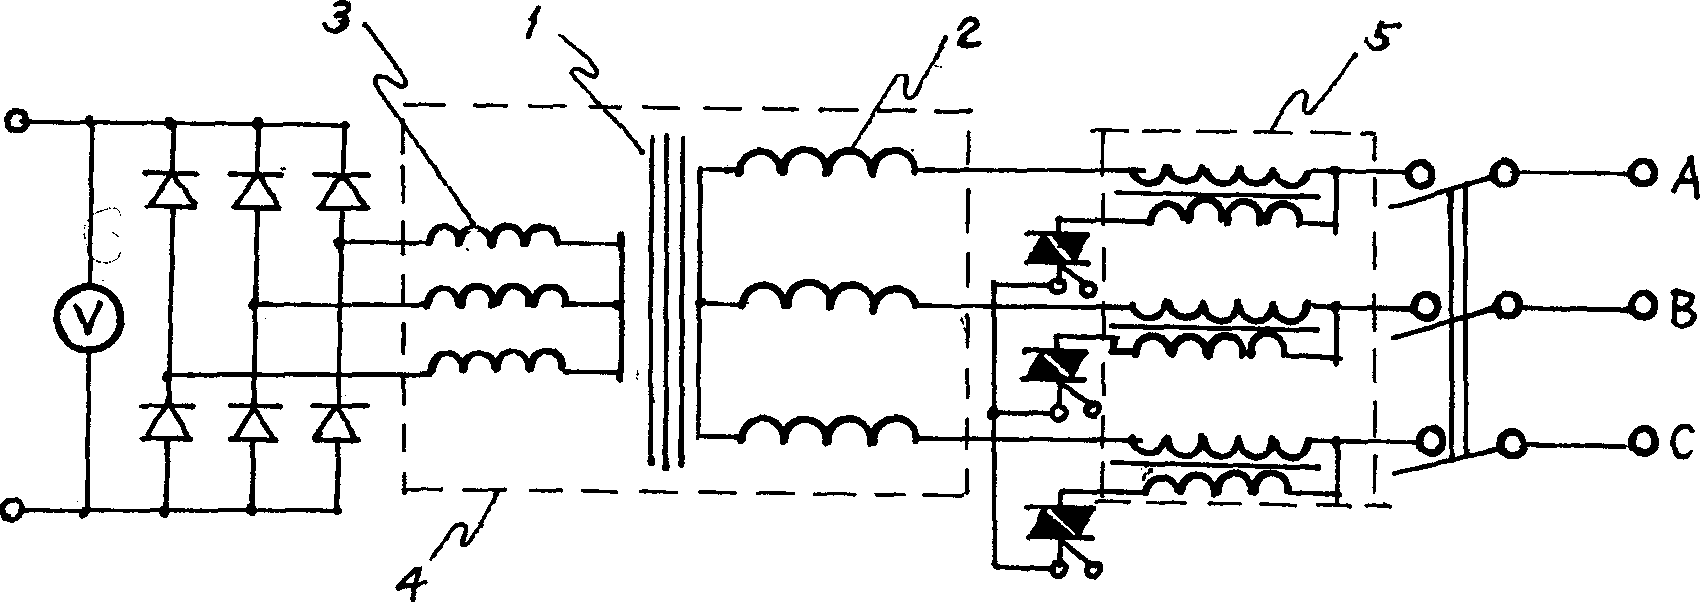 Power supply system for arc welding